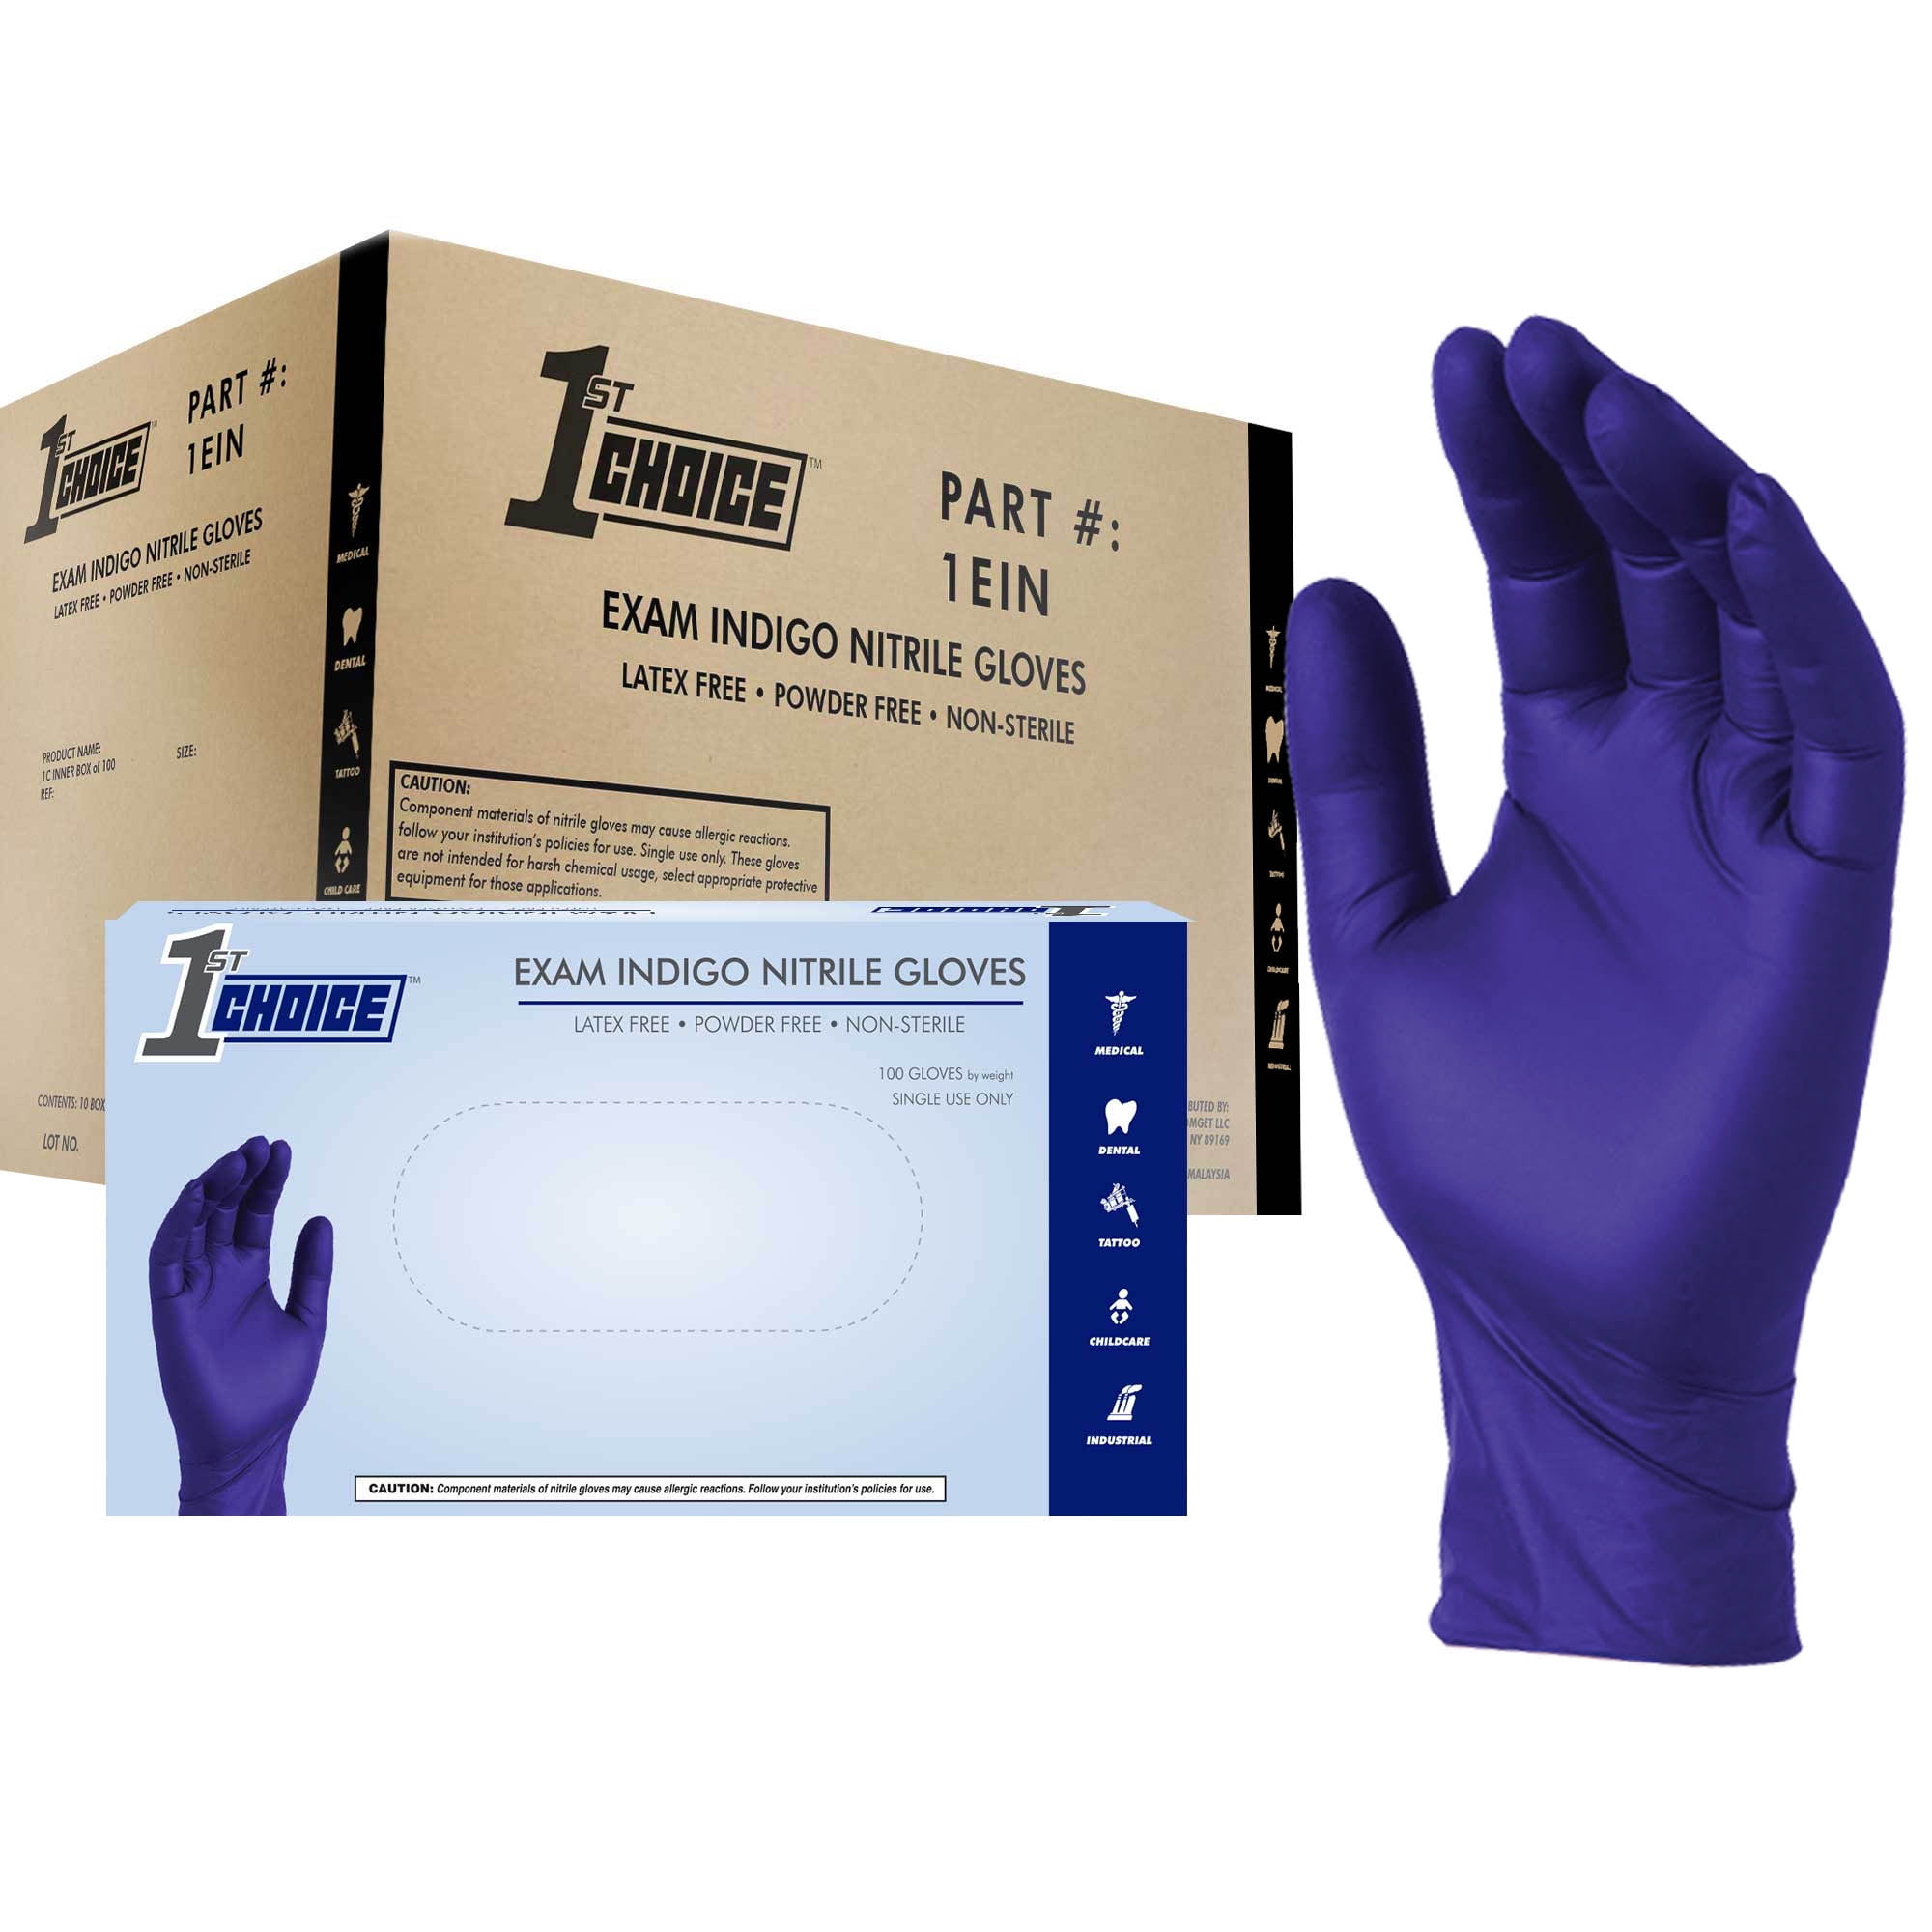 Law Enforcement Medical Examination Nitrile Gloves| XS-XL Case of 200| Blue Tattoo Artists Latex/Powder-Free Color : Black, Size : S Non-Sterile| Professional Grade for Hospitals 